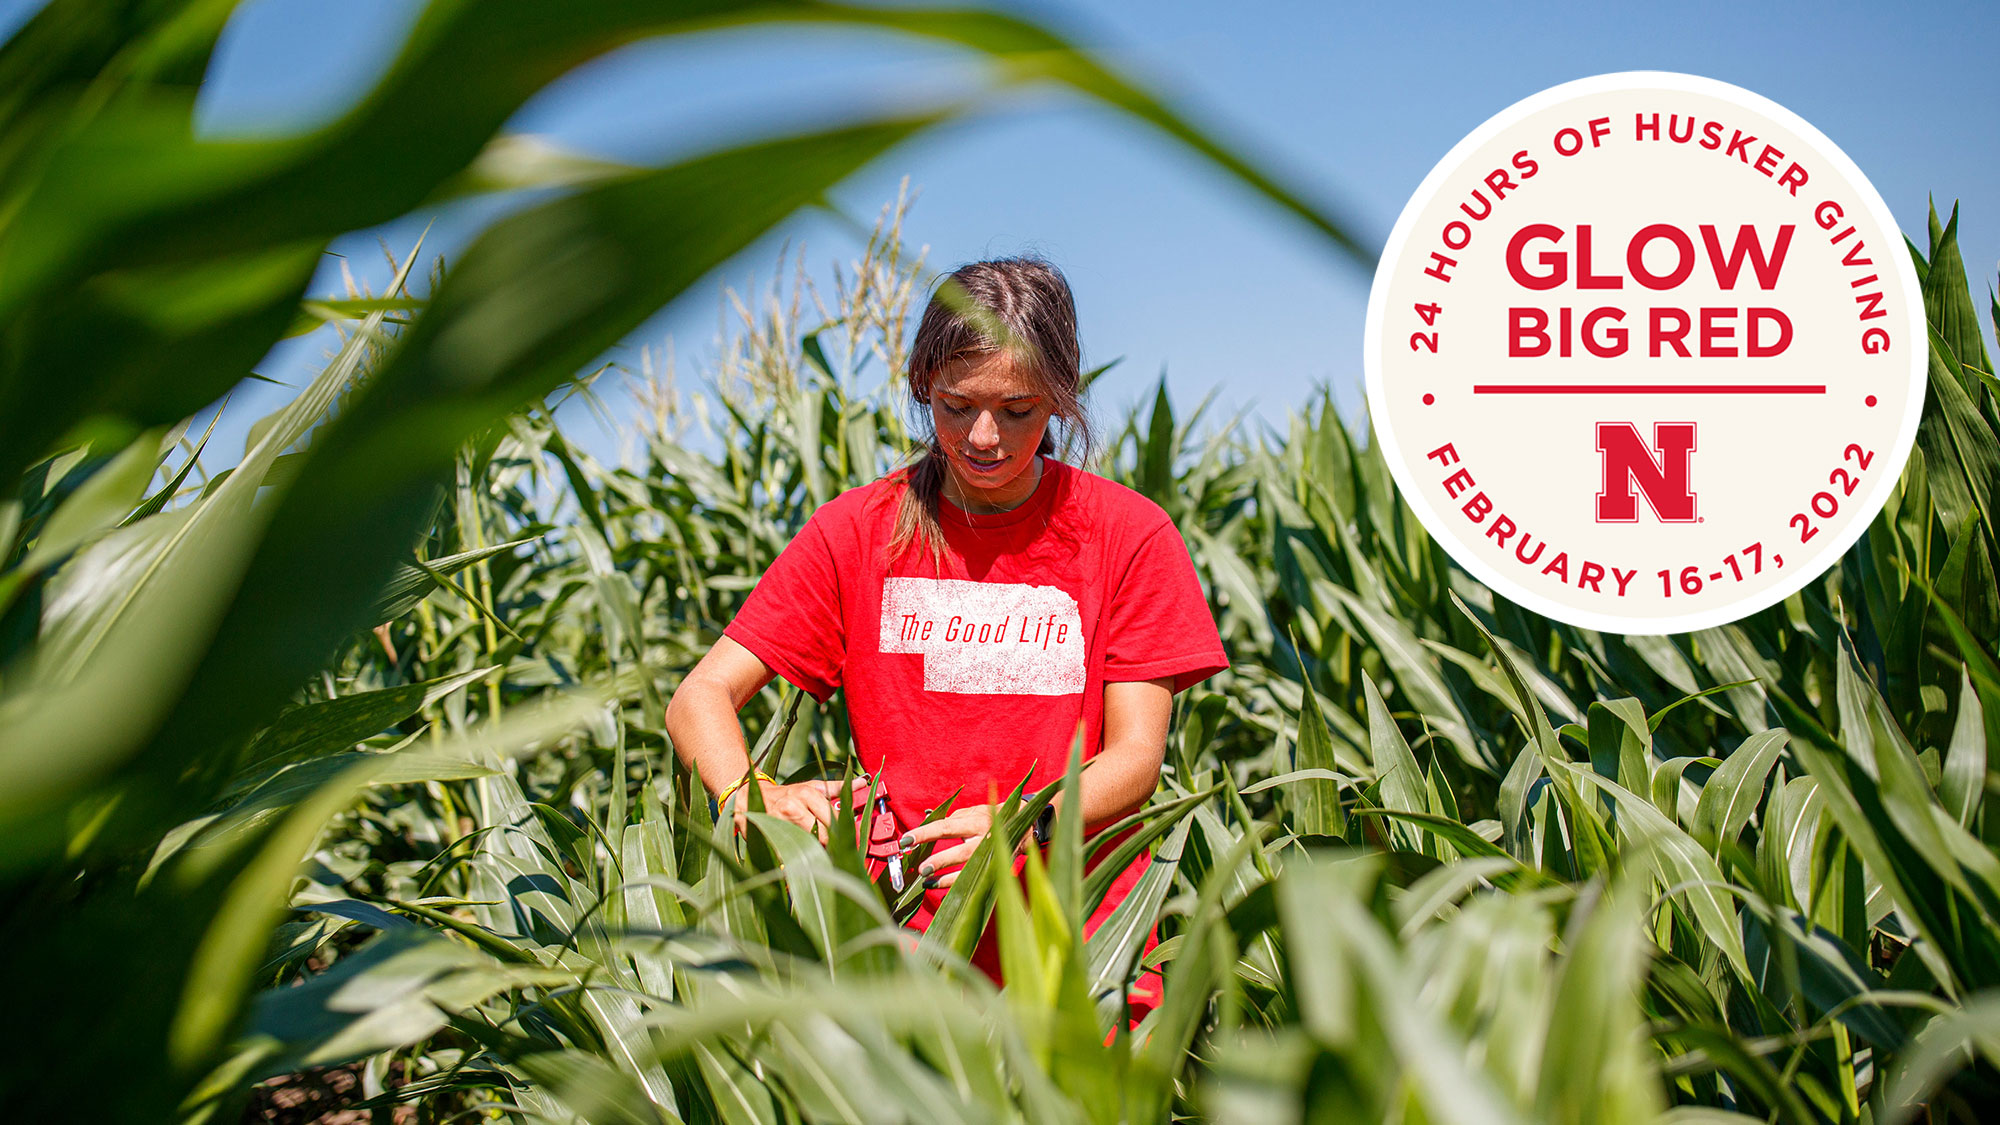 #GlowBigRed 2022 is finally here! From noon today, Feb. 16, to noon tomorrow, Feb. 17, we’re celebrating our campus and the people who make the University of Nebraska–Lincoln a special place by ensuring more students can realize their dreams at Nebraska.